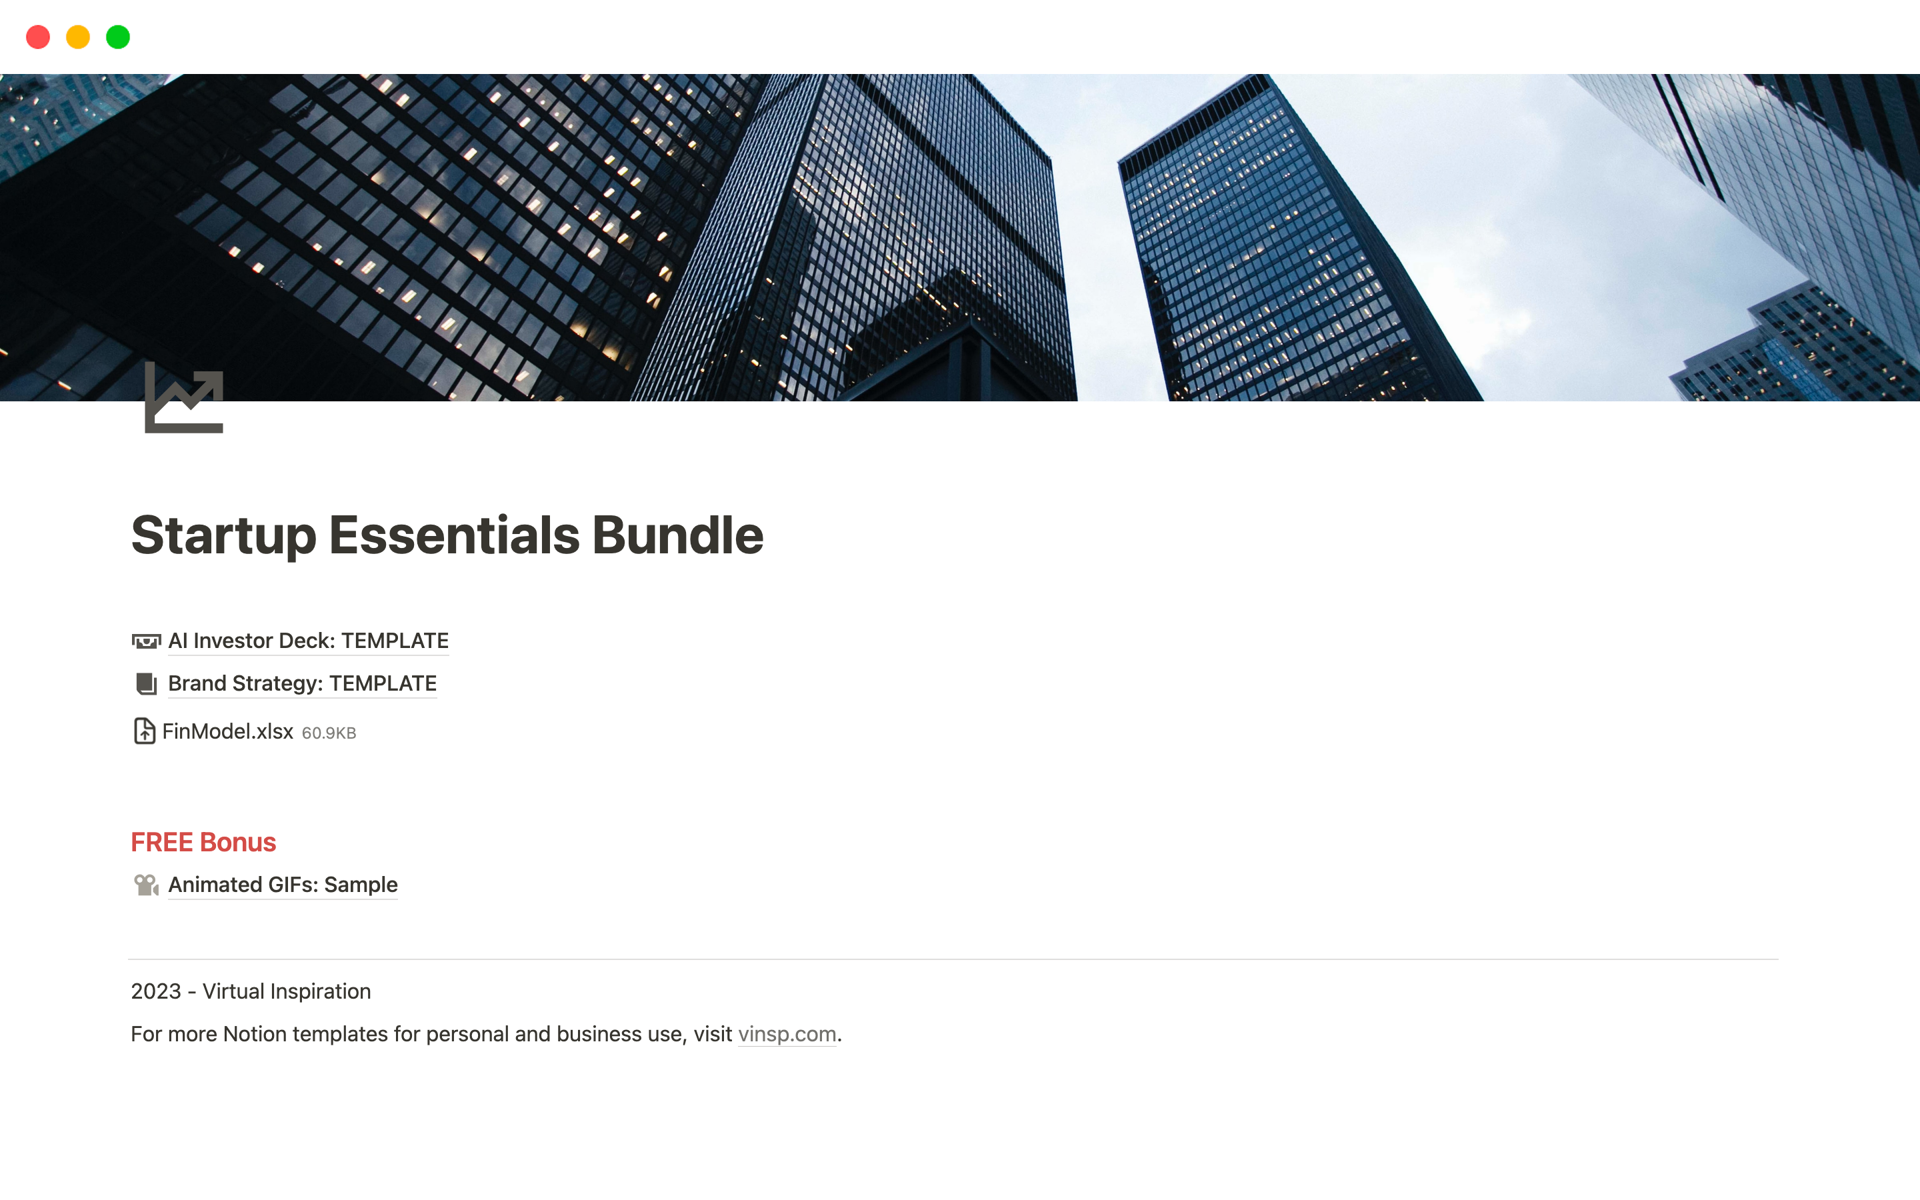 The Startup Essential Bundle is an all-in-one toolkit offering an AI-powered pitch deck and brand strategy templates alongside a detailed financial model specifically designed to secure investor attention, facilitate strategic planning, and propel any startup towards success.